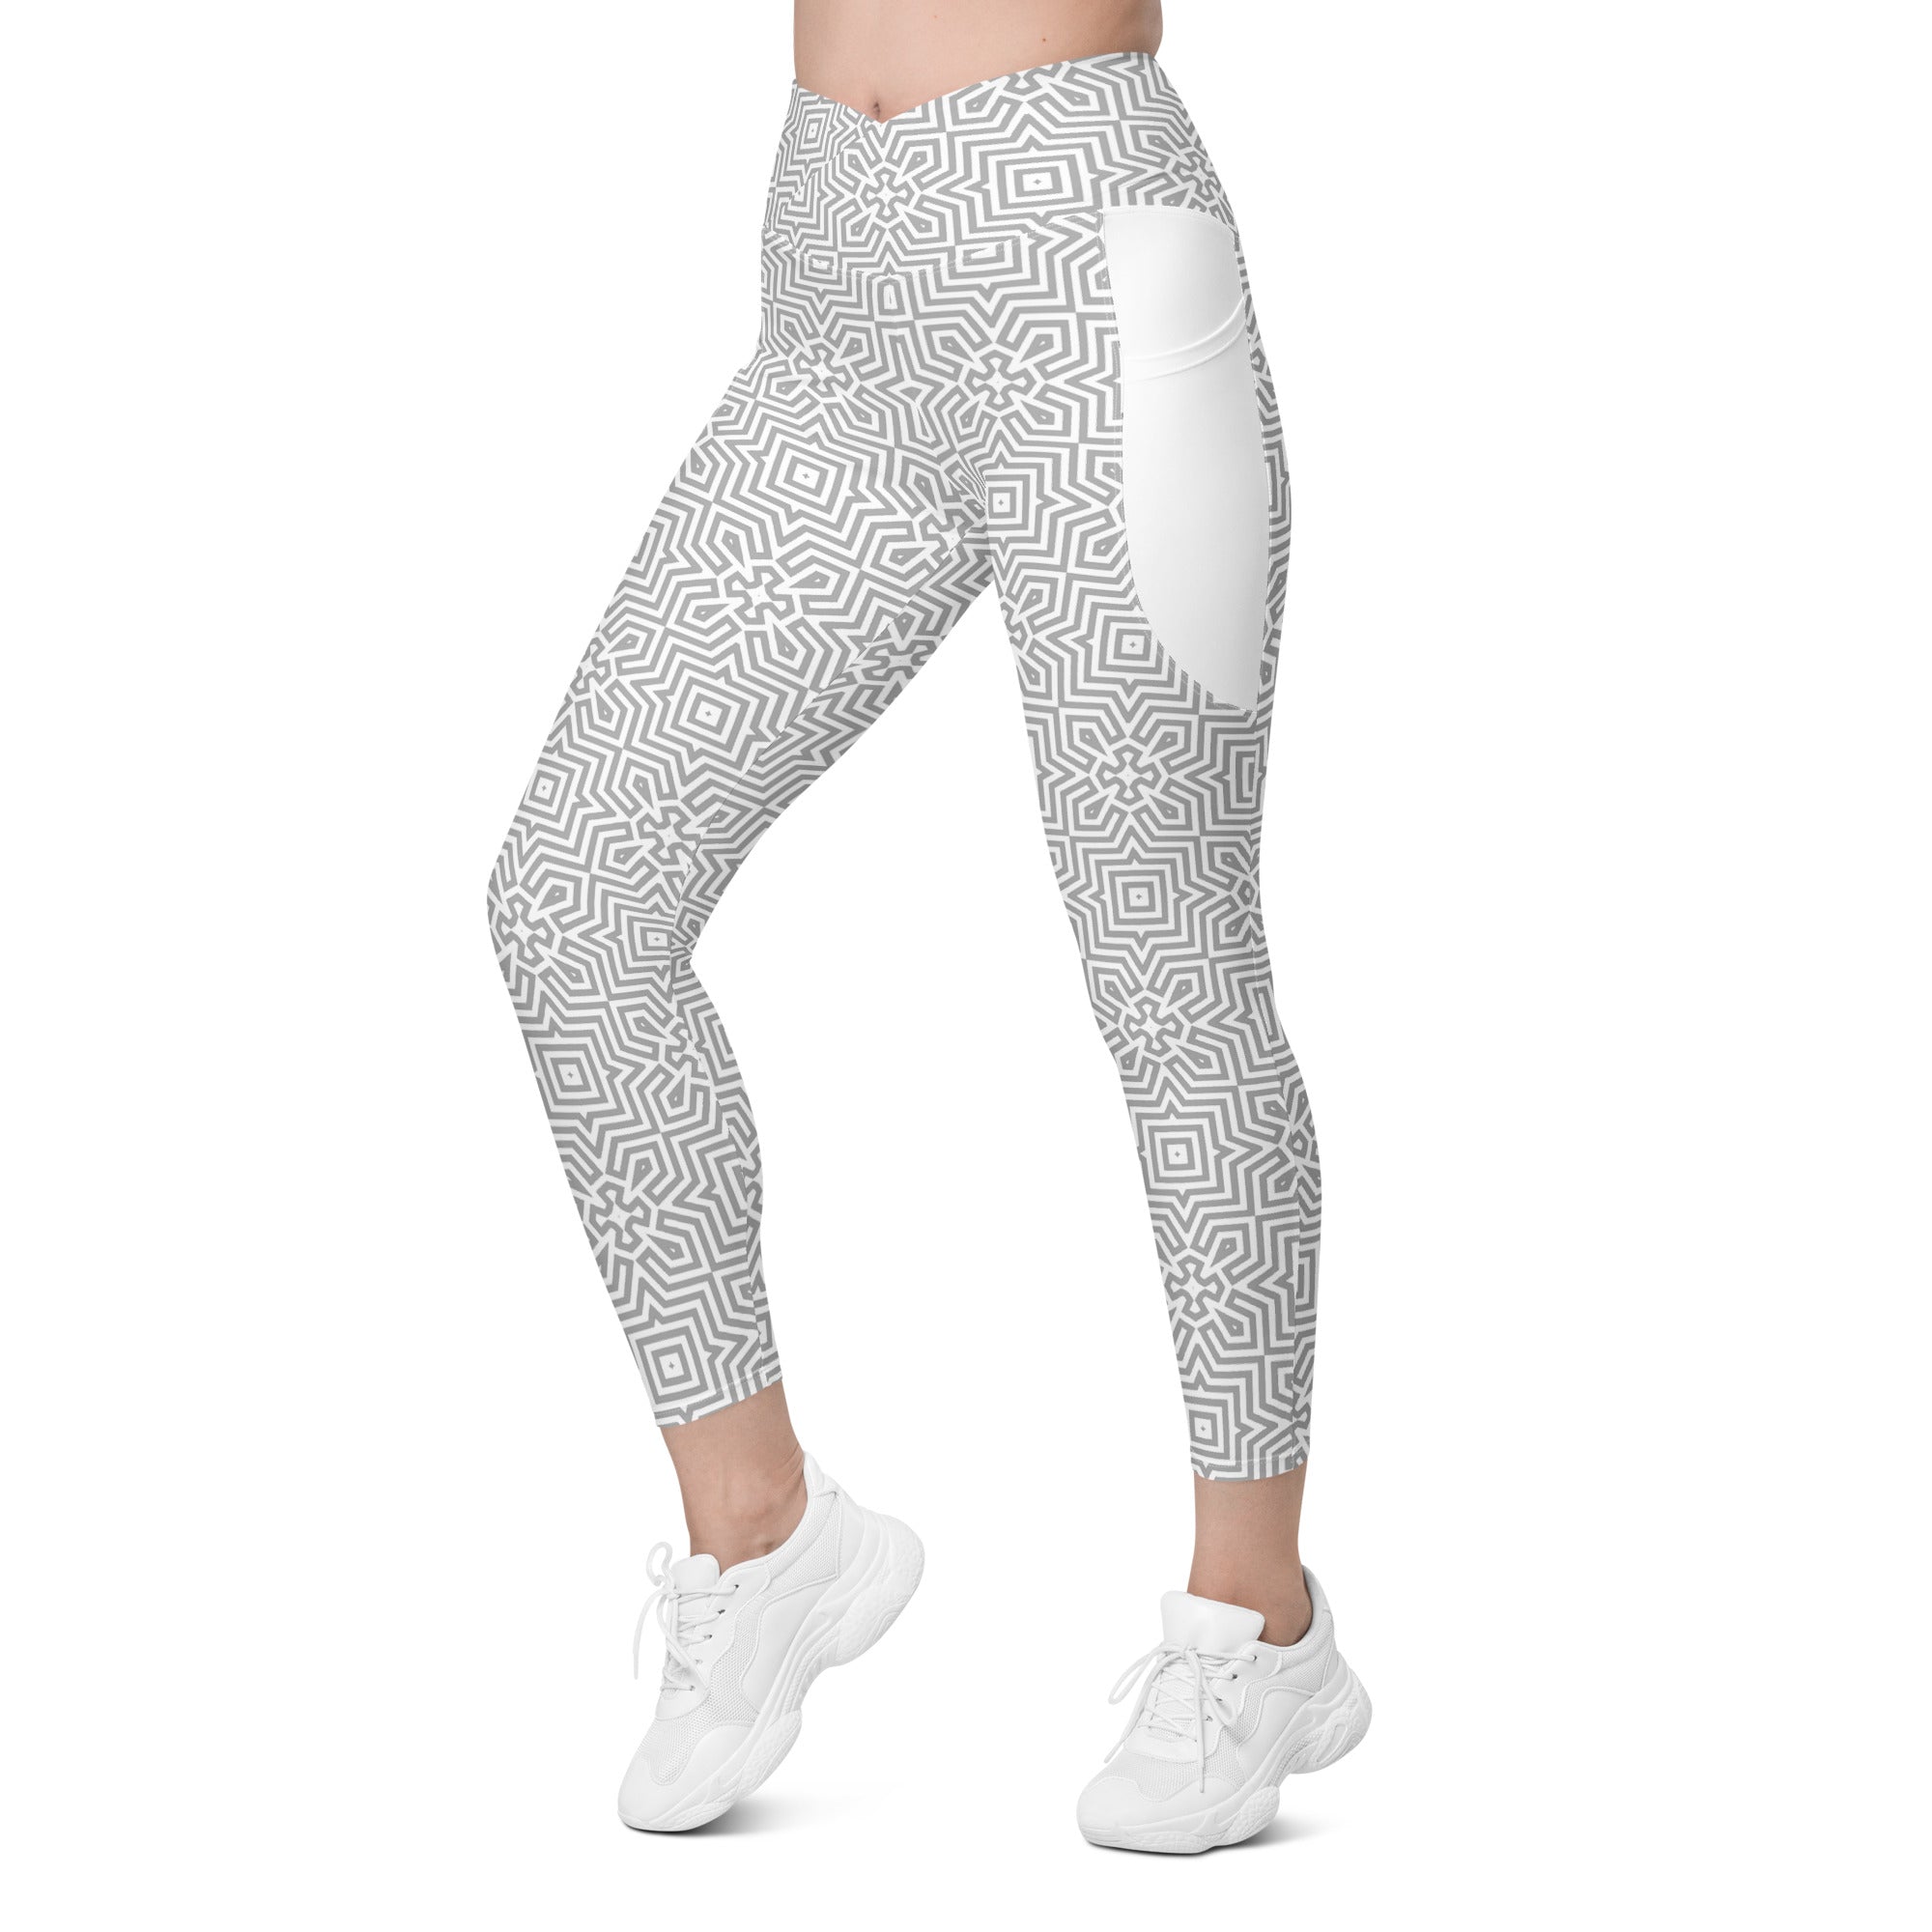 Versatile Paisley Paradise leggings with pockets for active lifestyles.